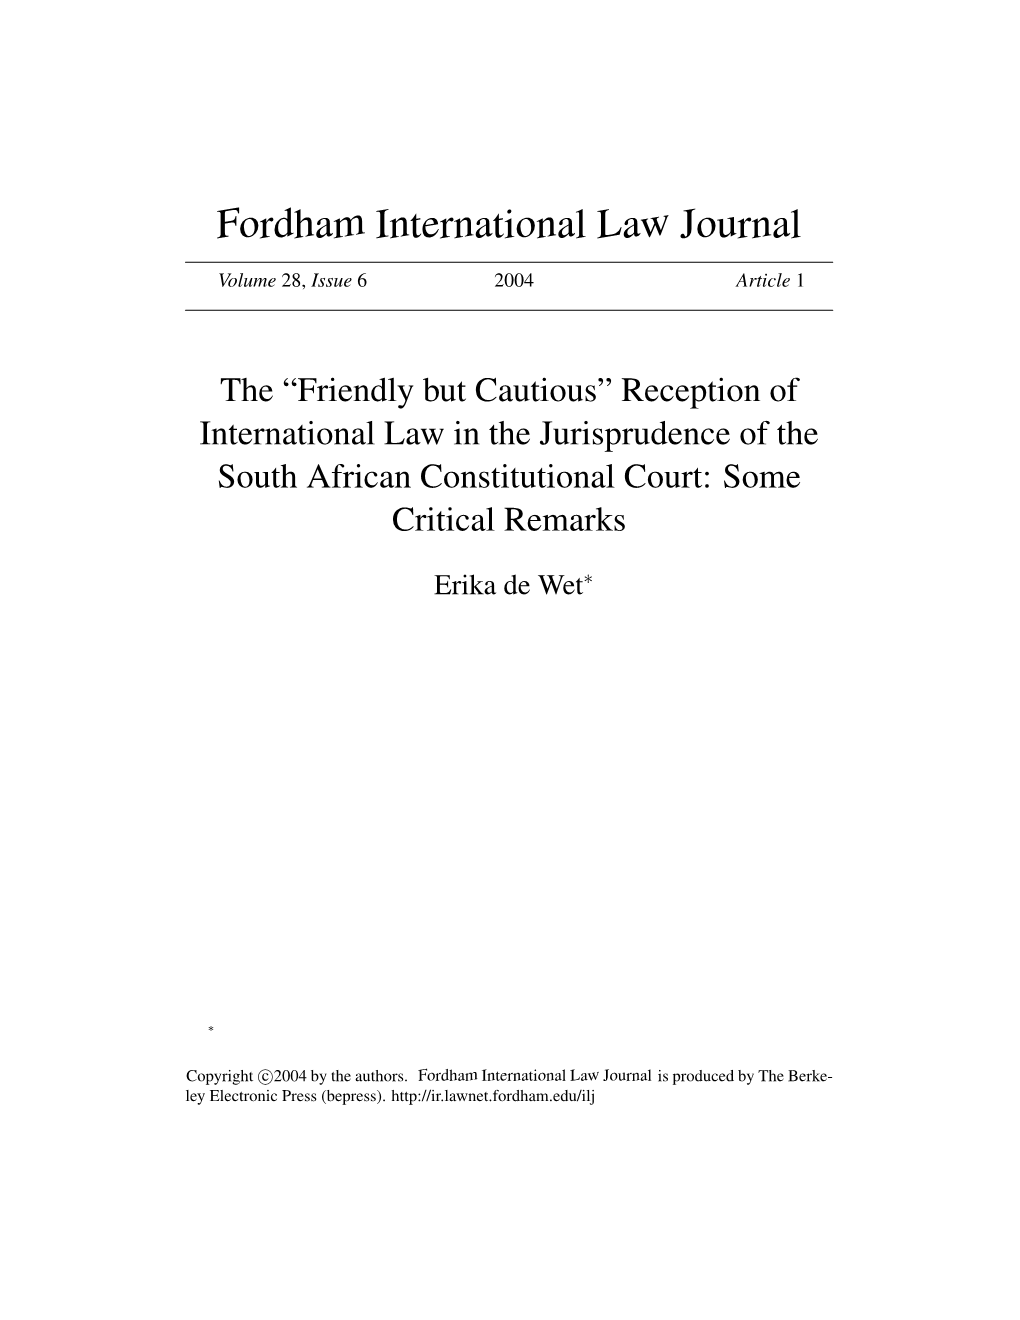 Reception of International Law in the Jurisprudence of the South African Constitutional Court: Some Critical Remarks